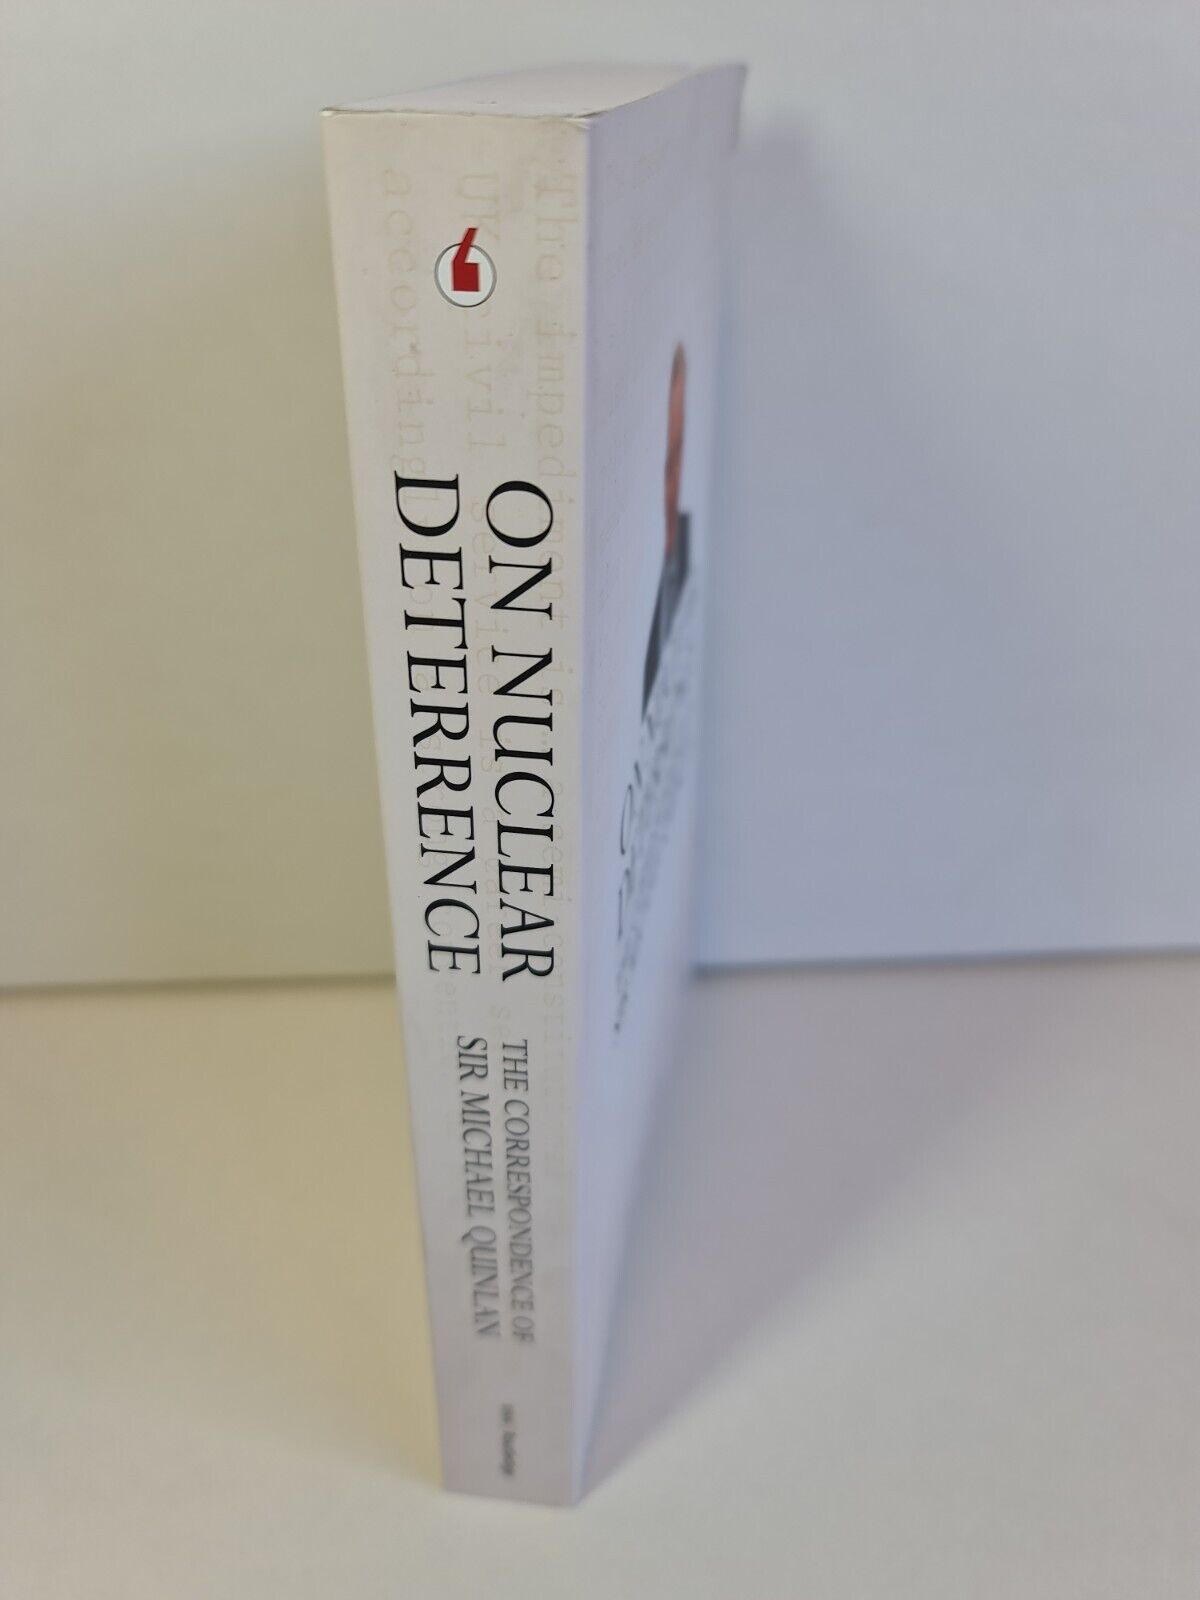 On Nuclear Deterrence: The Correspondence of Sir Michael Quinlan (2011)